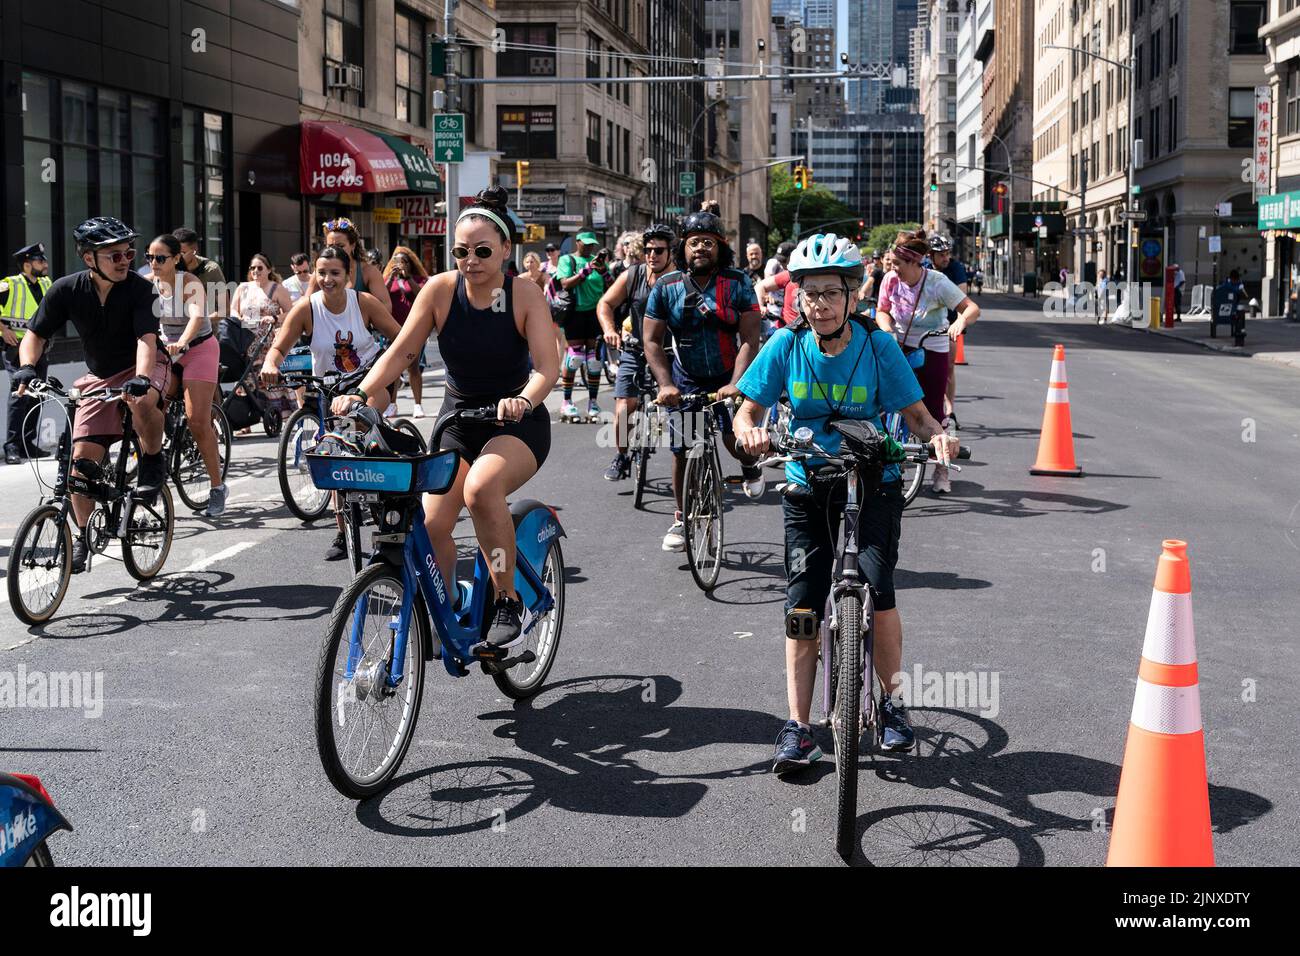 People participate in the Summer Streets program free of car traffic starting at City Hall and along Centre Street and Park Avenue till Harlem. The program includes various physical activities for all ages: Biking, walking and skating along the street free of traffic. At rest stops people can drink water, repair bicycles, rest using hammocks, play for kids, receive free helmets provided by the Department of transportation, free food and drinks samples, and many more. (Photo by Lev Radin/Pacific Press) Stock Photo